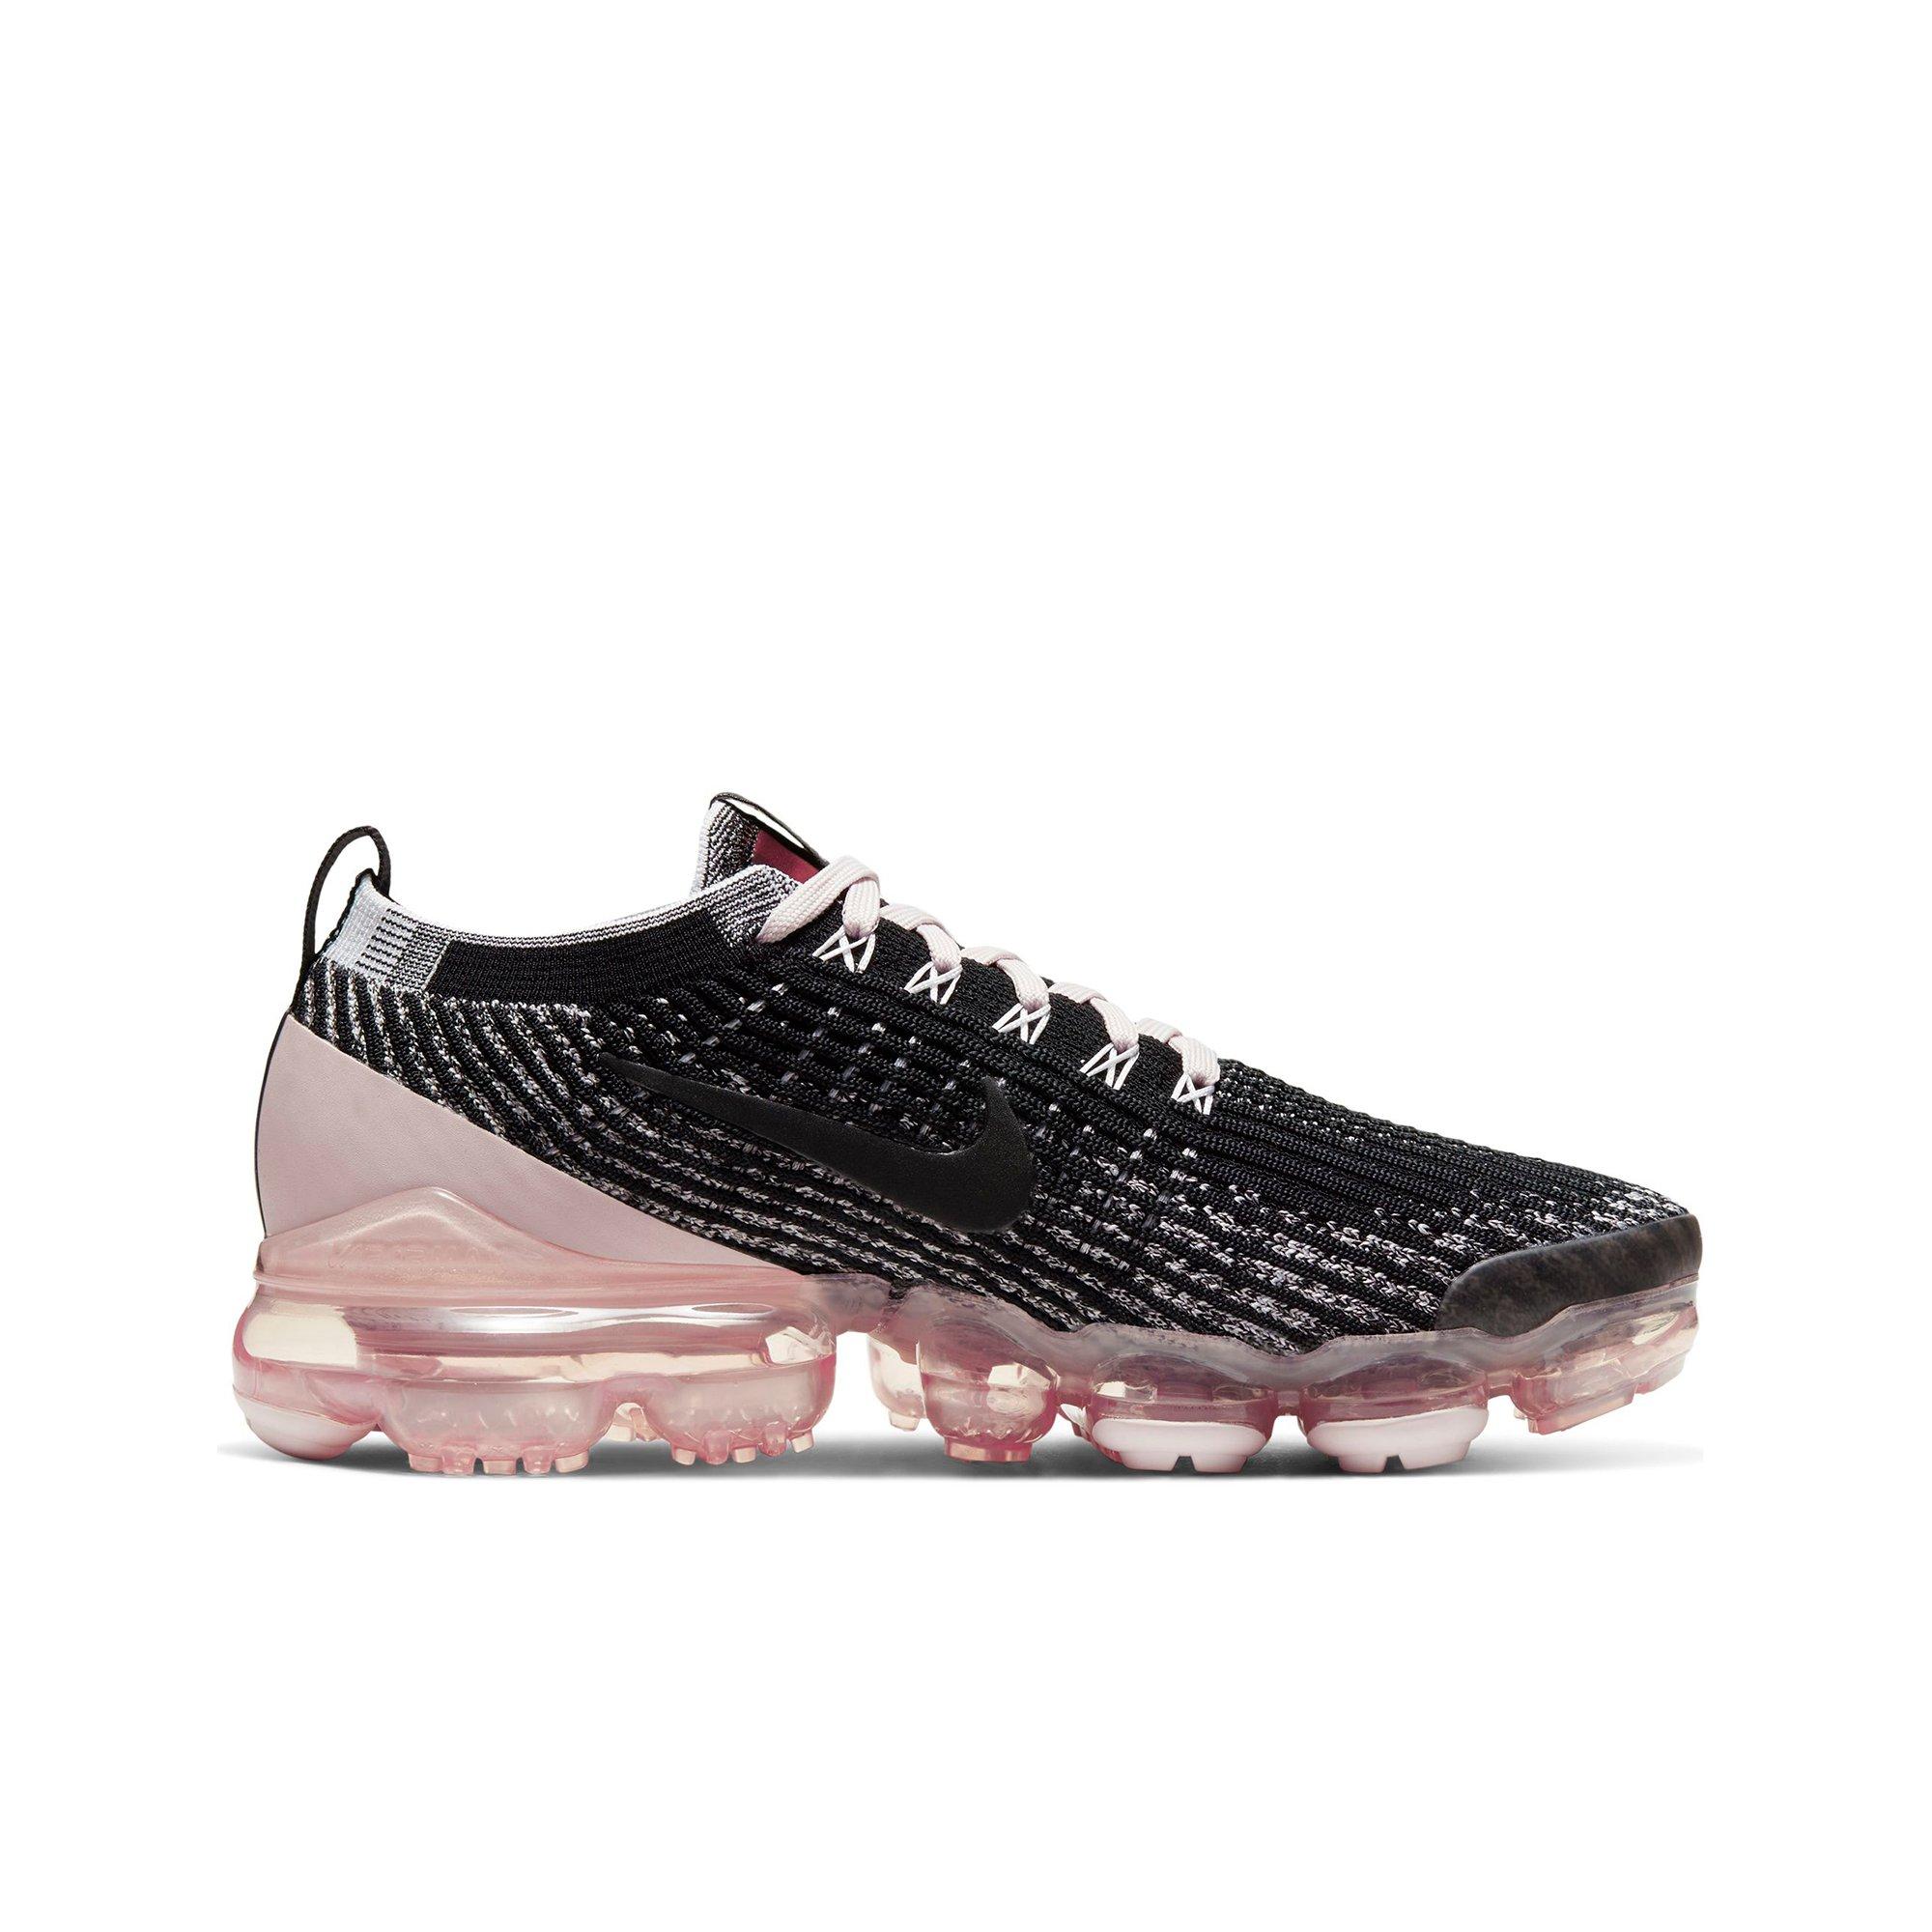 nike vapormax flyknit grey and pink